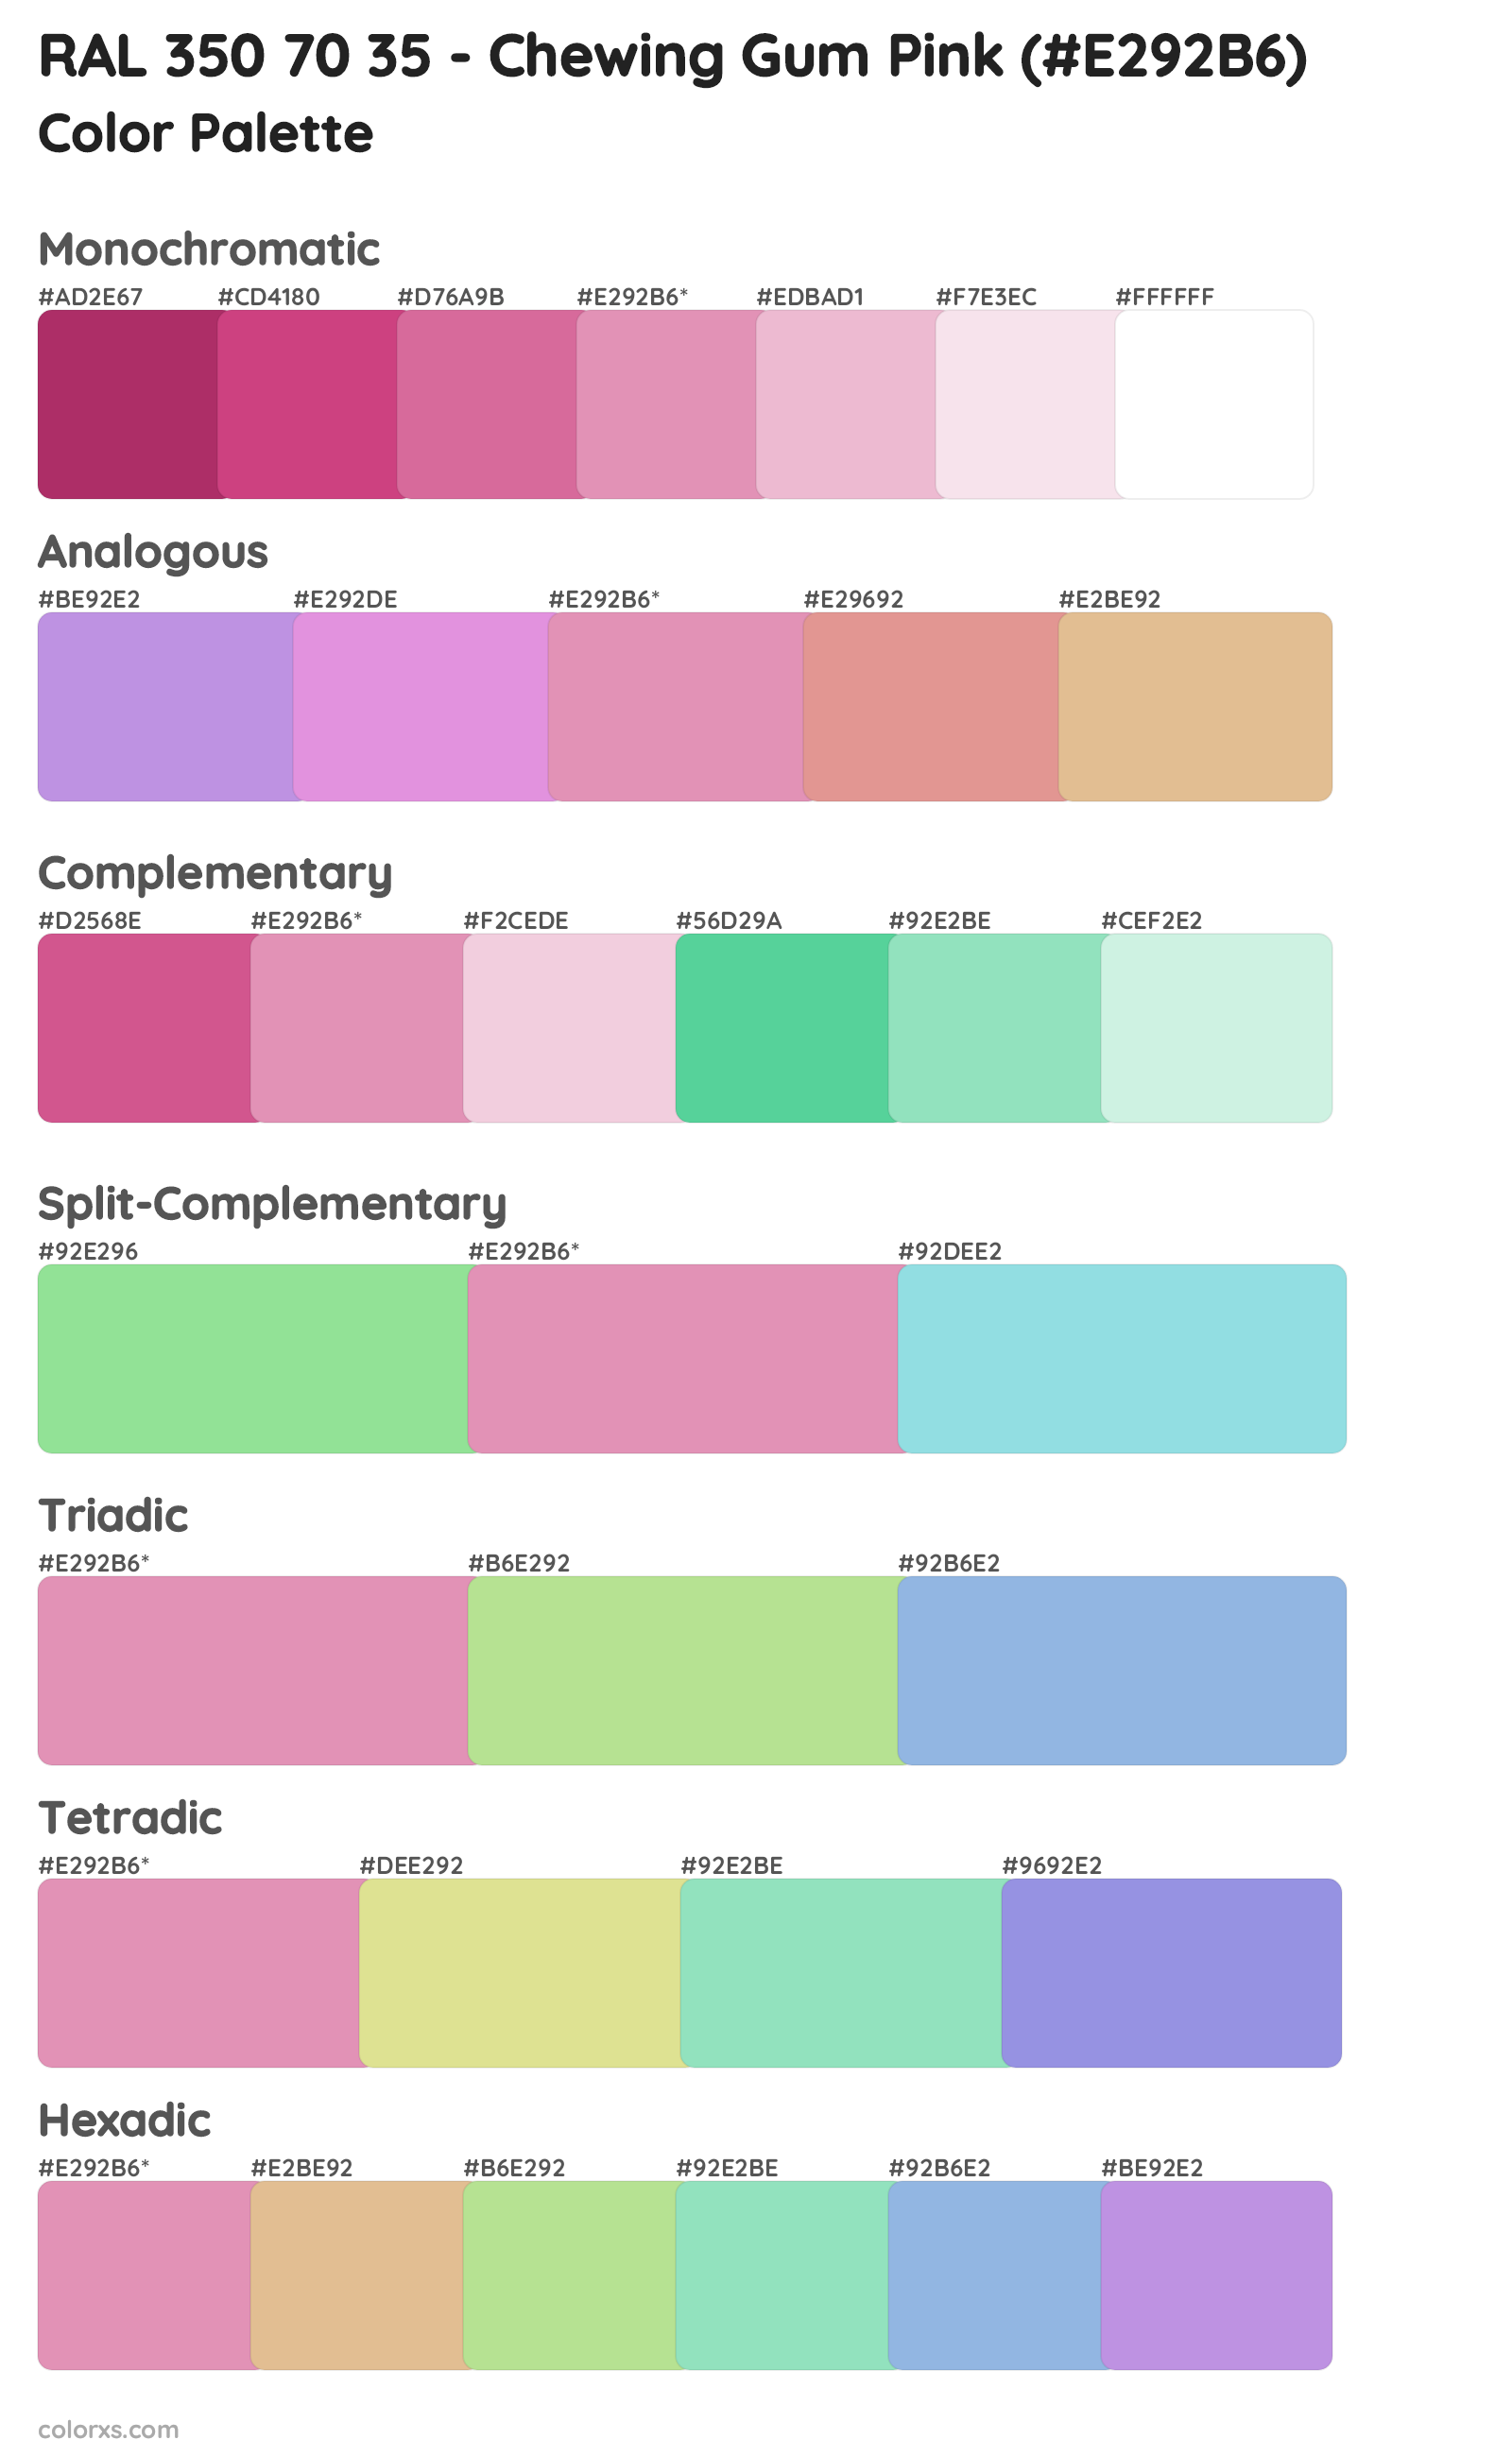 RAL 350 70 35 - Chewing Gum Pink Color Scheme Palettes